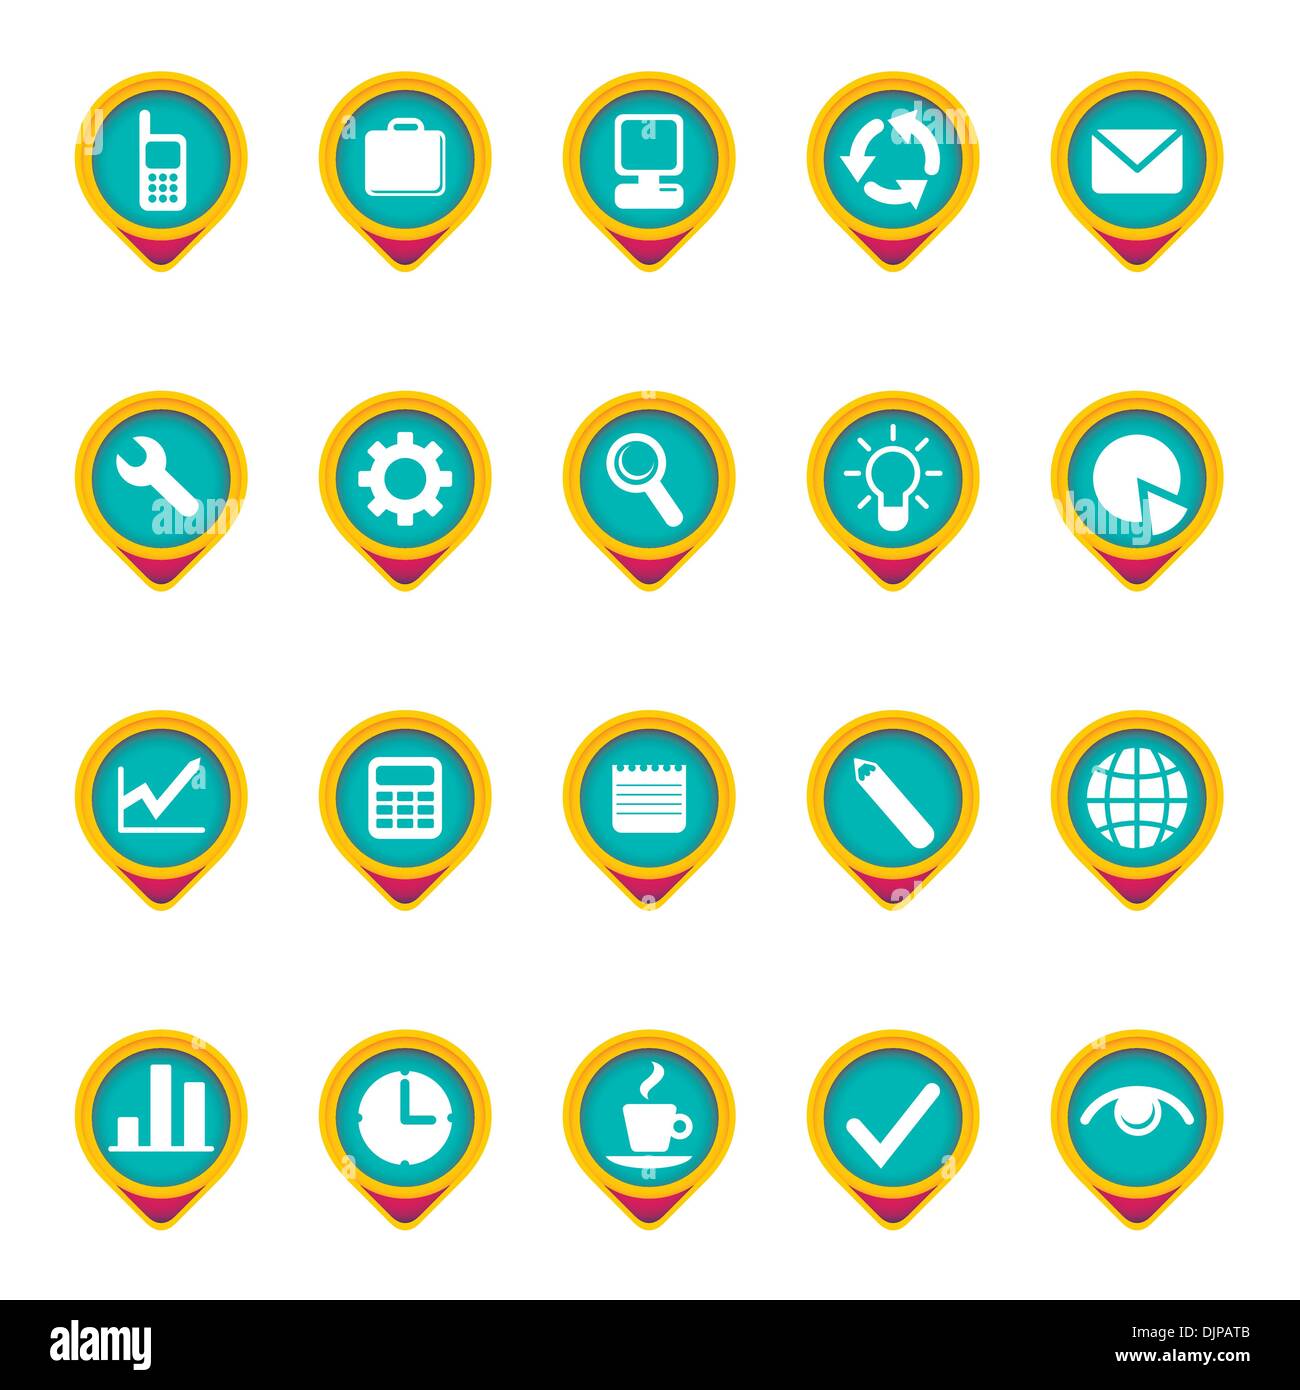 Composed icon set in color Stock Vector